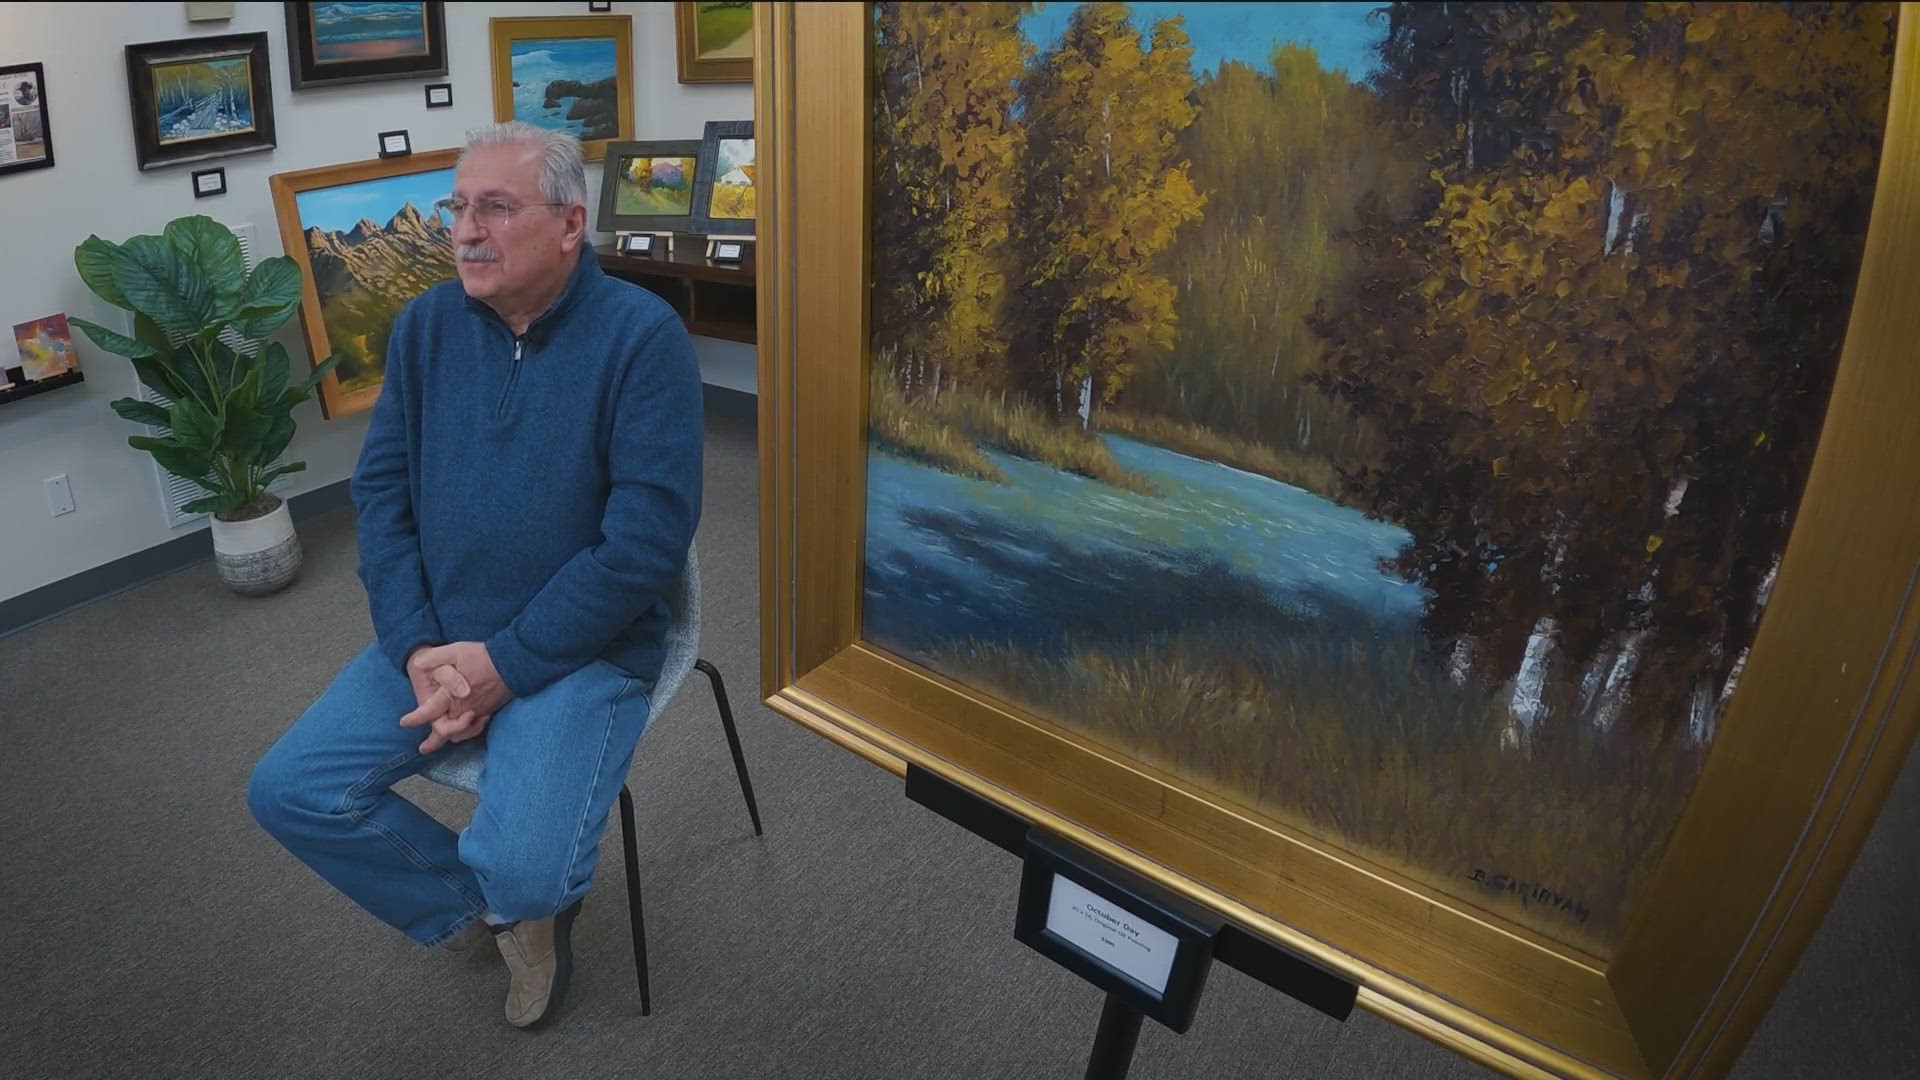 Bill Garibyan's passion for art was influenced by his father in the former Soviet Union. Now, he is the anchor artist of the new Idaho Art Gallery in Meridian.